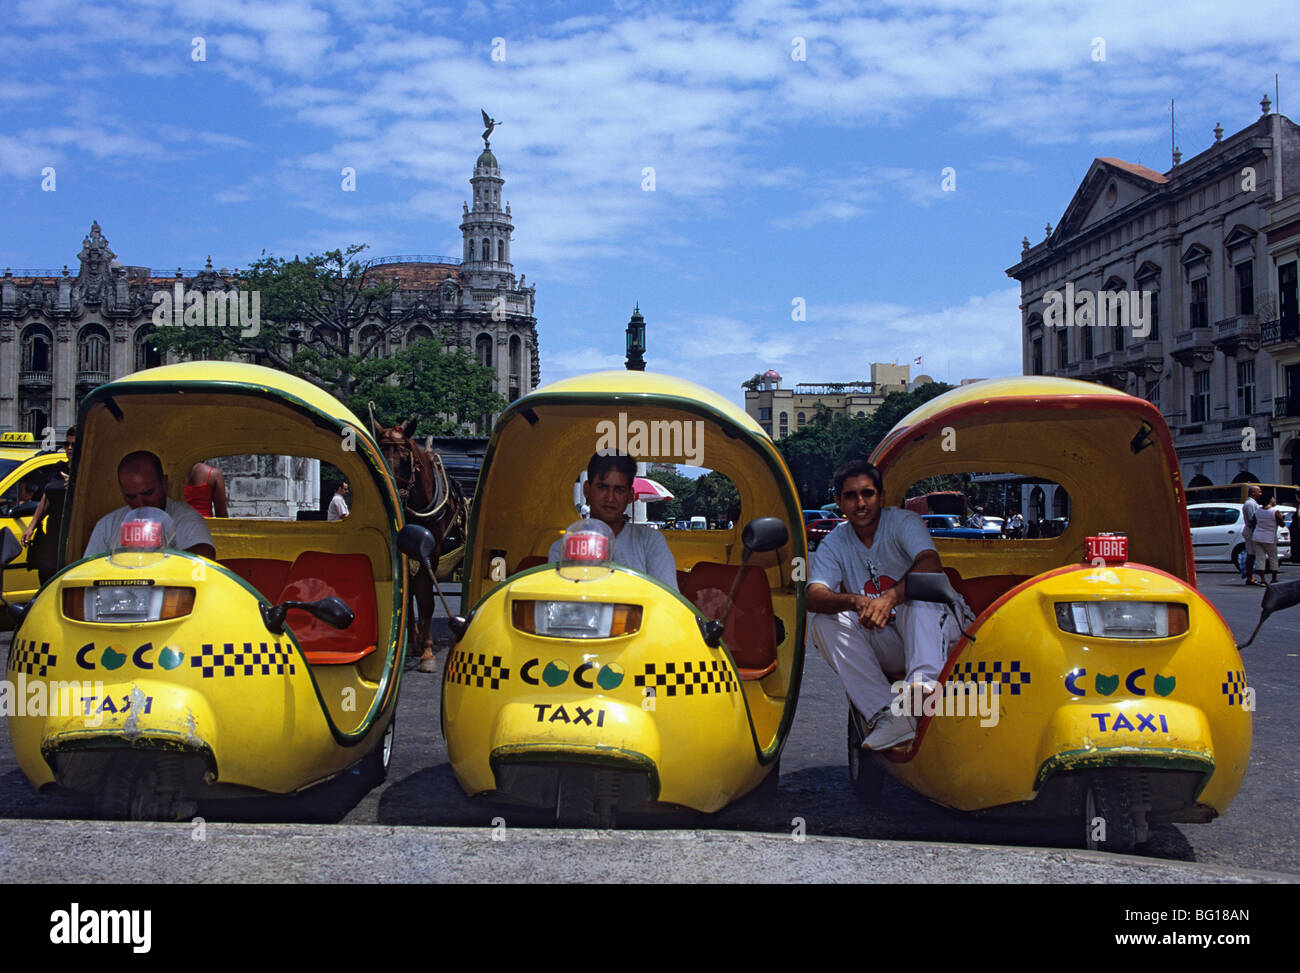 Coco taxi rank outside the Capitolio, Central Havana, Cuba, West Indies, Central America Stock Photo